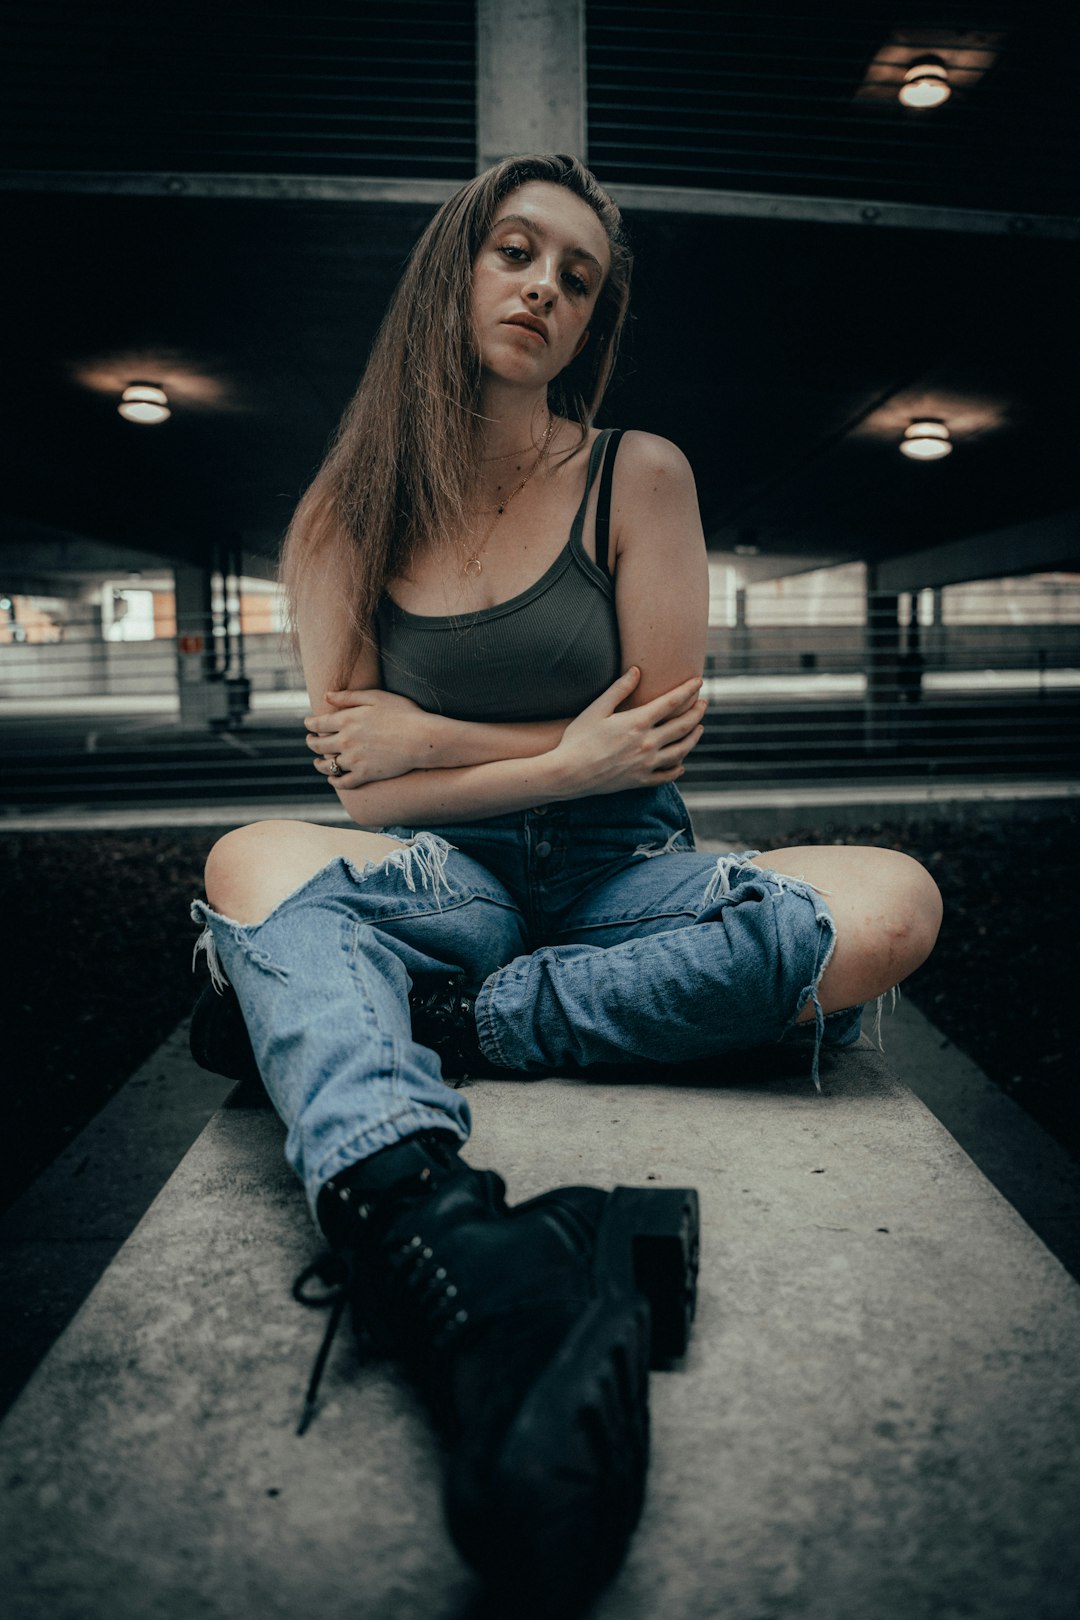 woman in black tank top and blue denim jeans sitting on sidewalk during night time